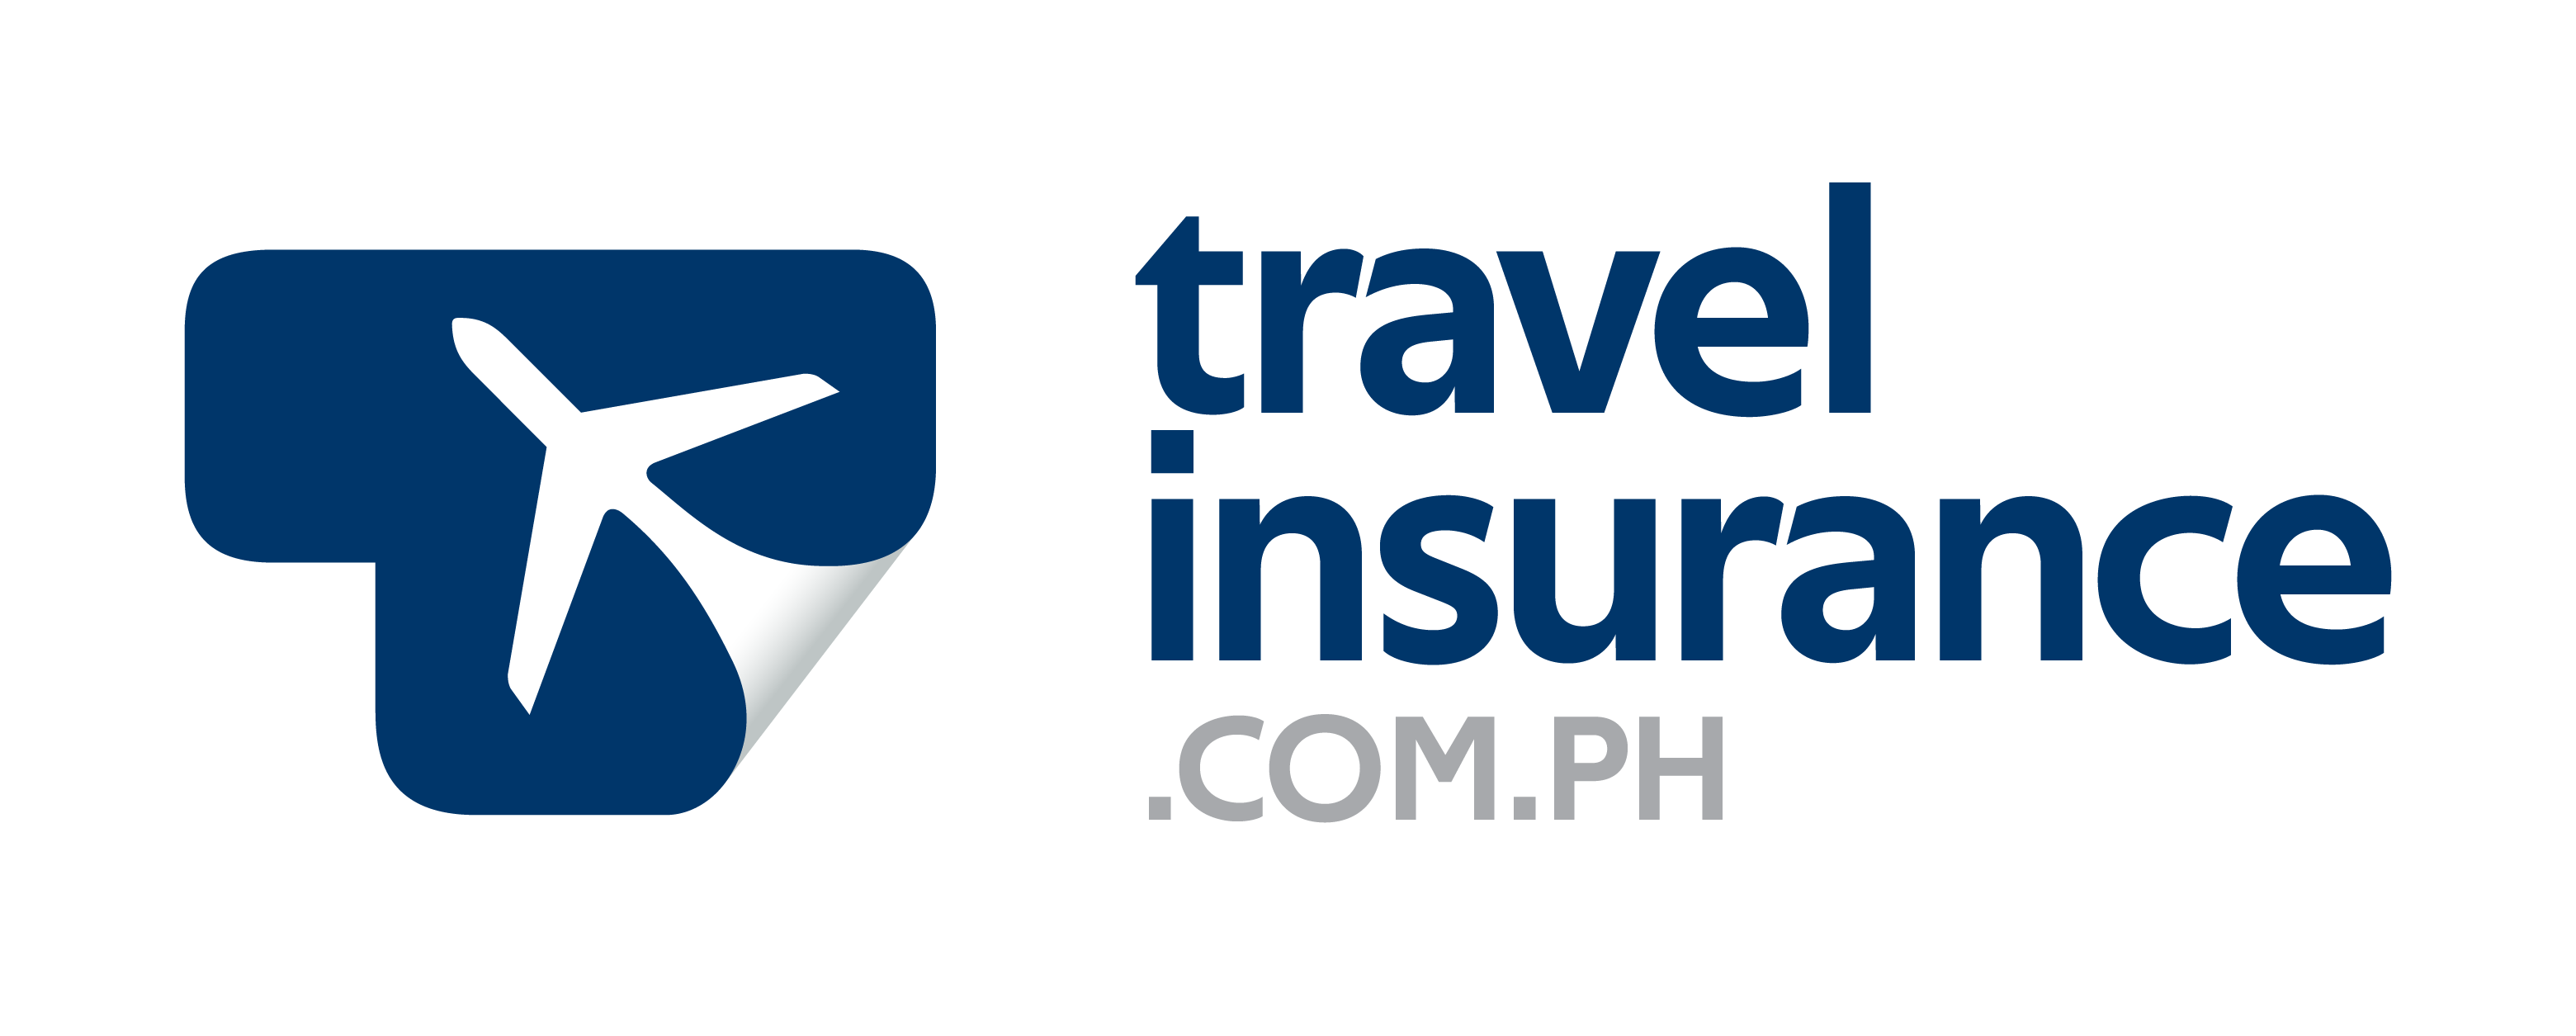 cheap travel insurance in philippines